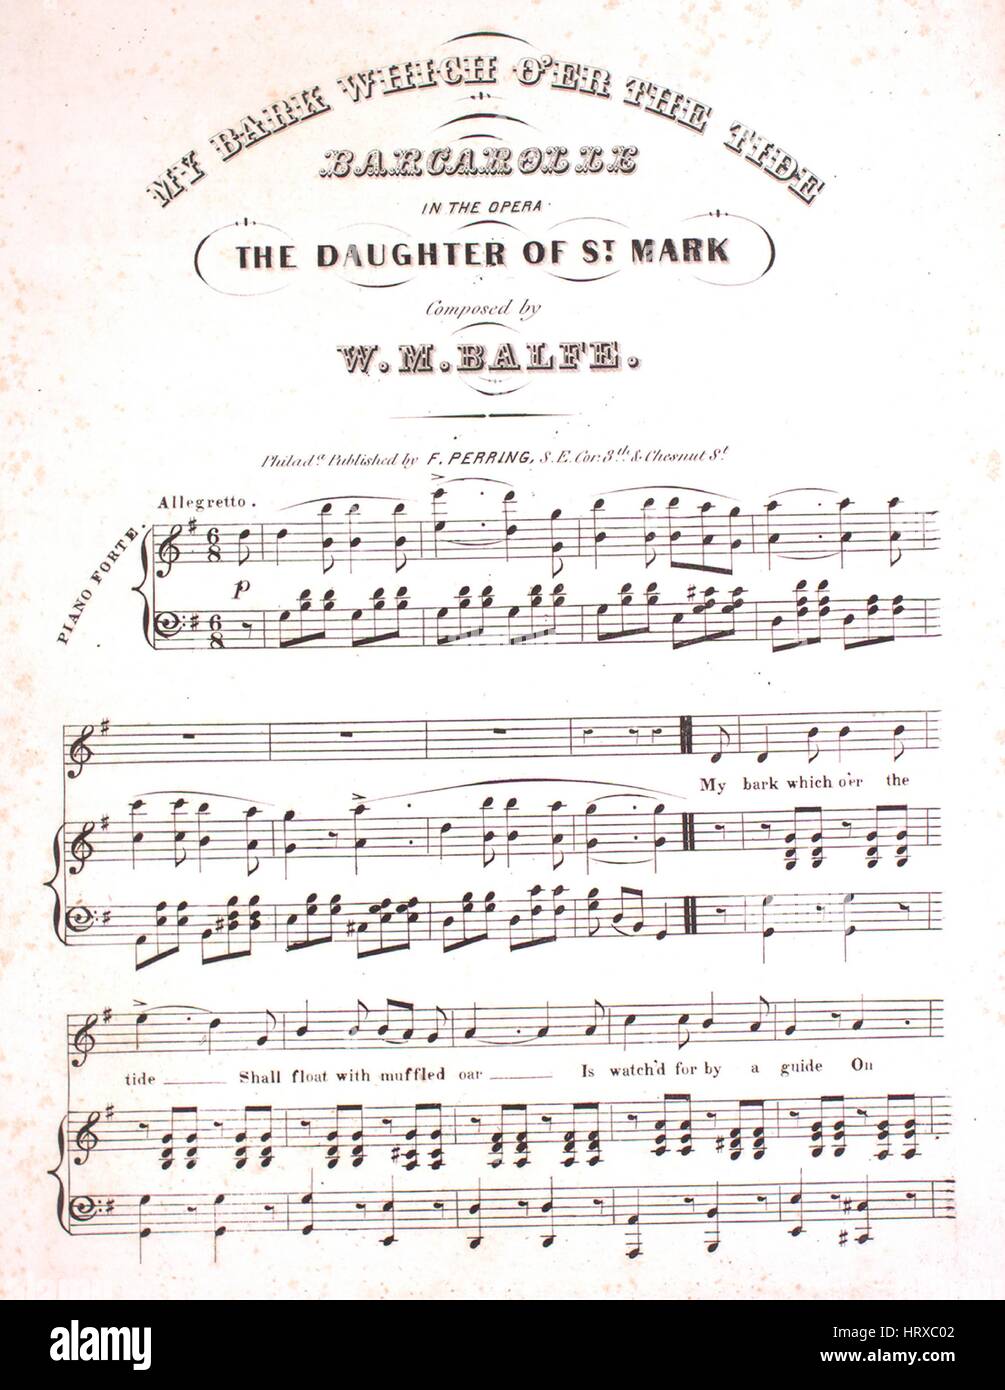 Sheet music cover image of the song 'My Bark Which O'er the Tide', with original authorship notes reading 'Composed by WM Balfe', United States, 1900. The publisher is listed as 'F. Perring, S.E. Cor. 3th and Chesnut St.', the form of composition is 'through-composed', the instrumentation is 'piano and voice', the first line reads 'My bark which o'er the tide shall float with muffled oar', and the illustration artist is listed as 'None'. Stock Photo